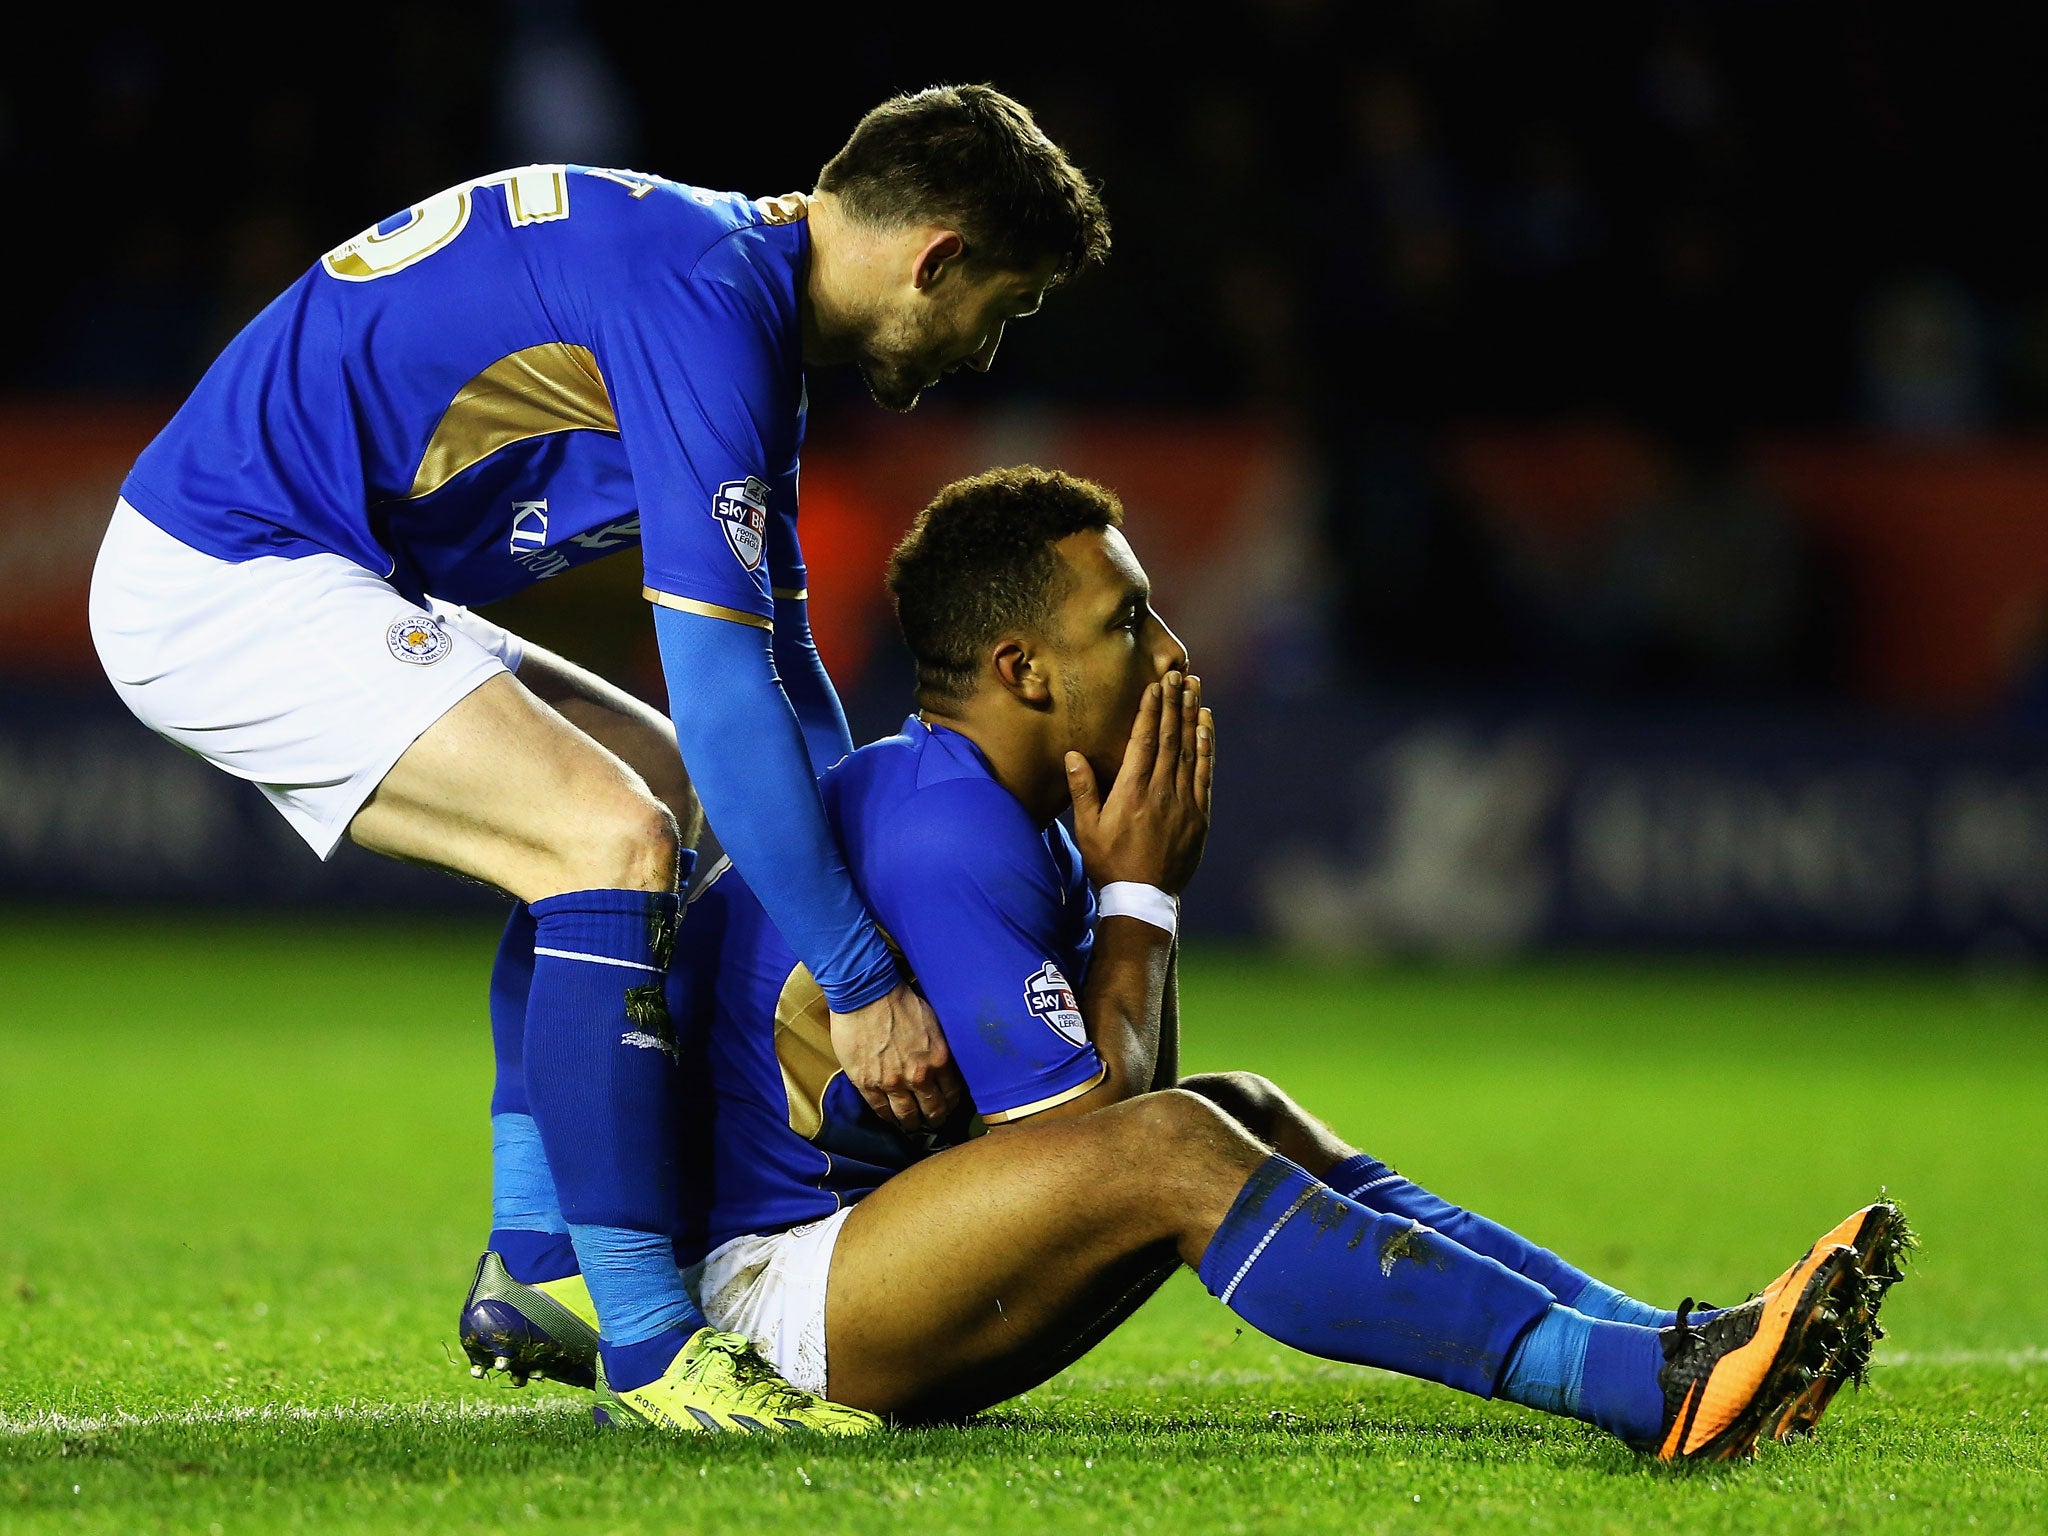 Leicester City's Liam Moore